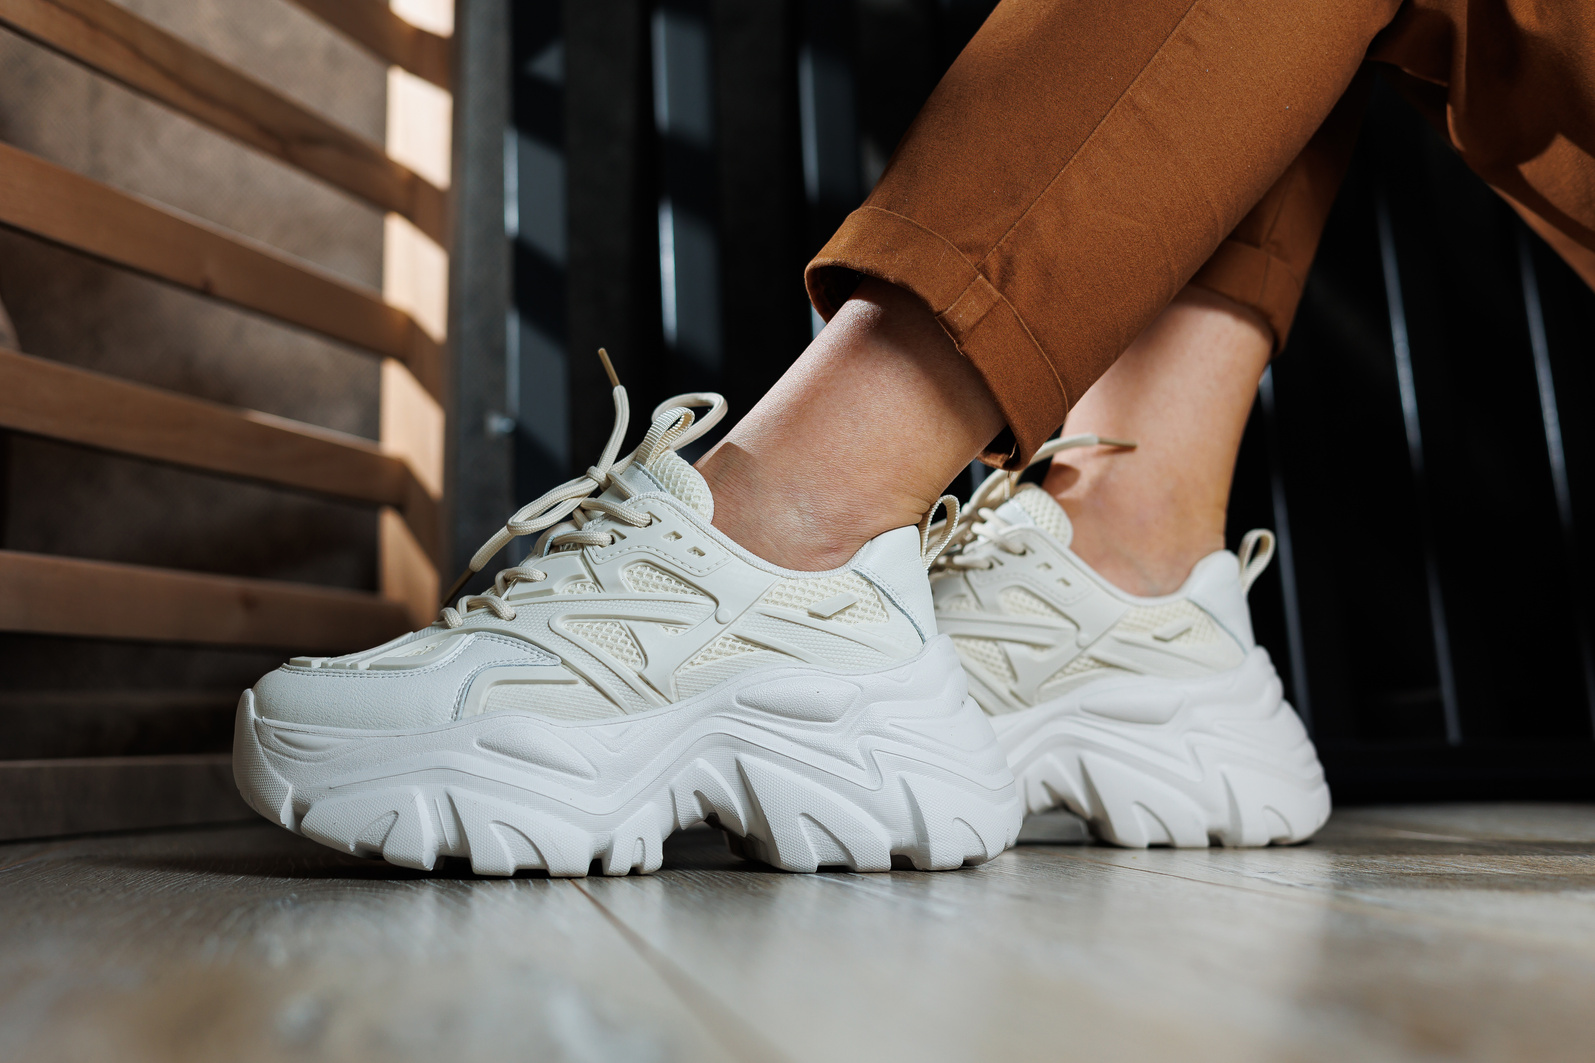 Collection of summer leather sneakers for women. Close-up of female legs in white sneakers. Women's summer sneakers with laces.